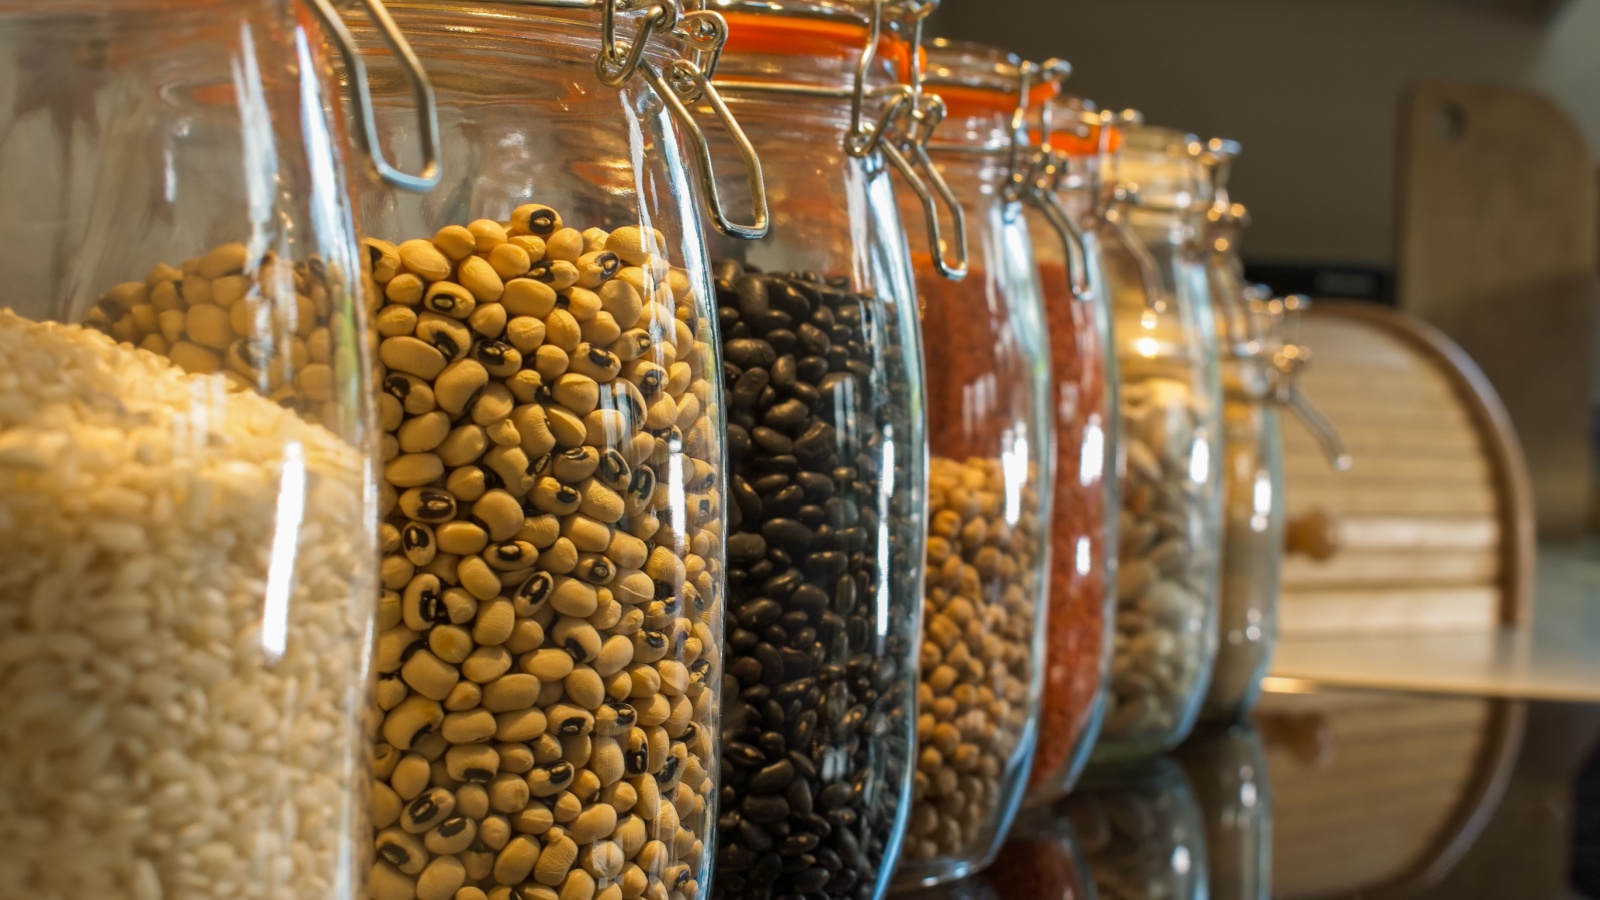 Beans and lentils placed in jars. Colourful selections of peas, a cooks essential store cupboard ingredients.